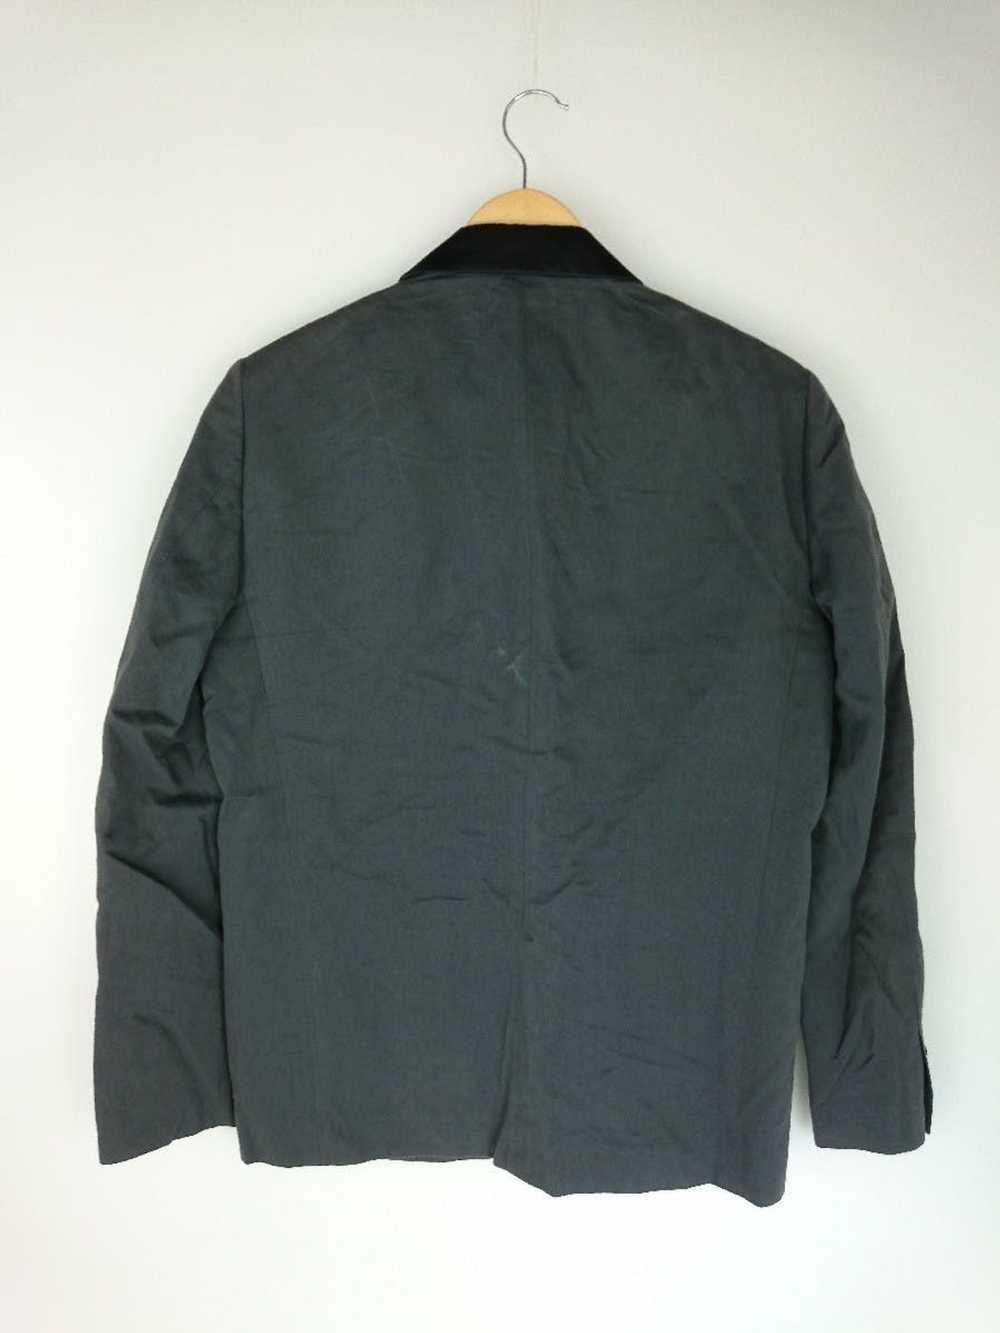 Undercover Light Jackets Gray Tailored Collar Swi… - image 2